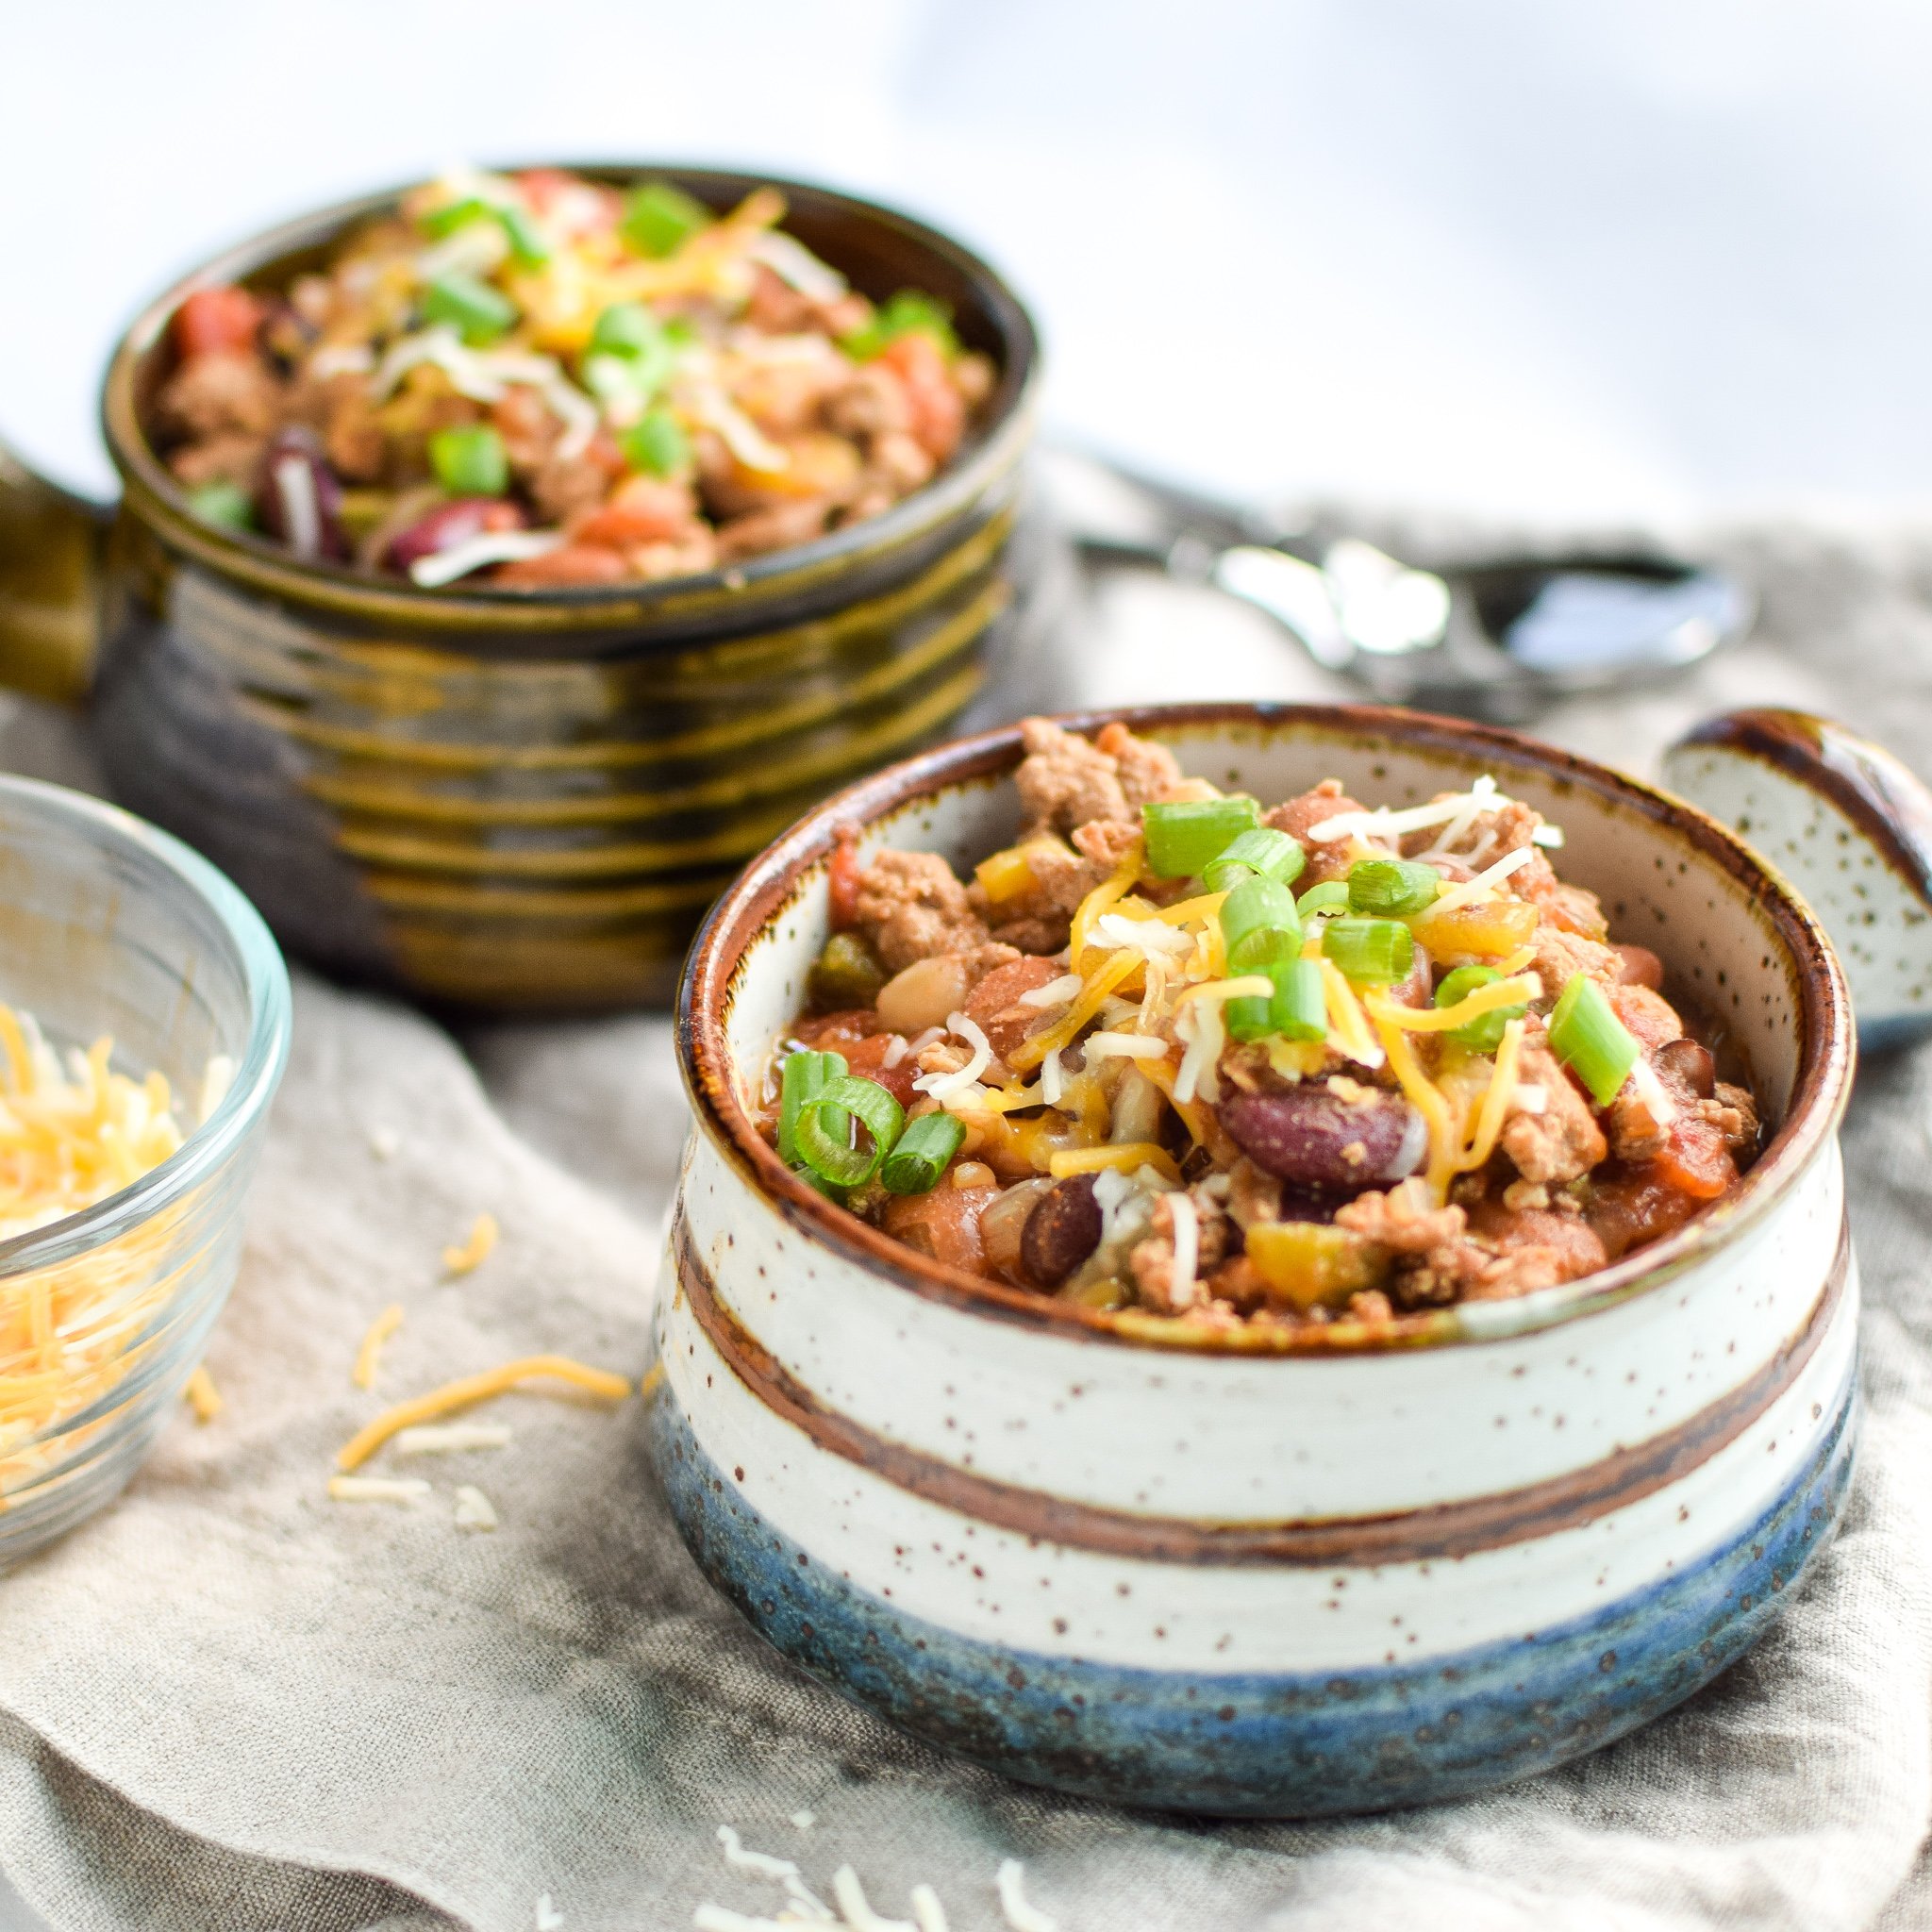 Easy Slow Cooker Bean Turkey Chili Project Meal Plan